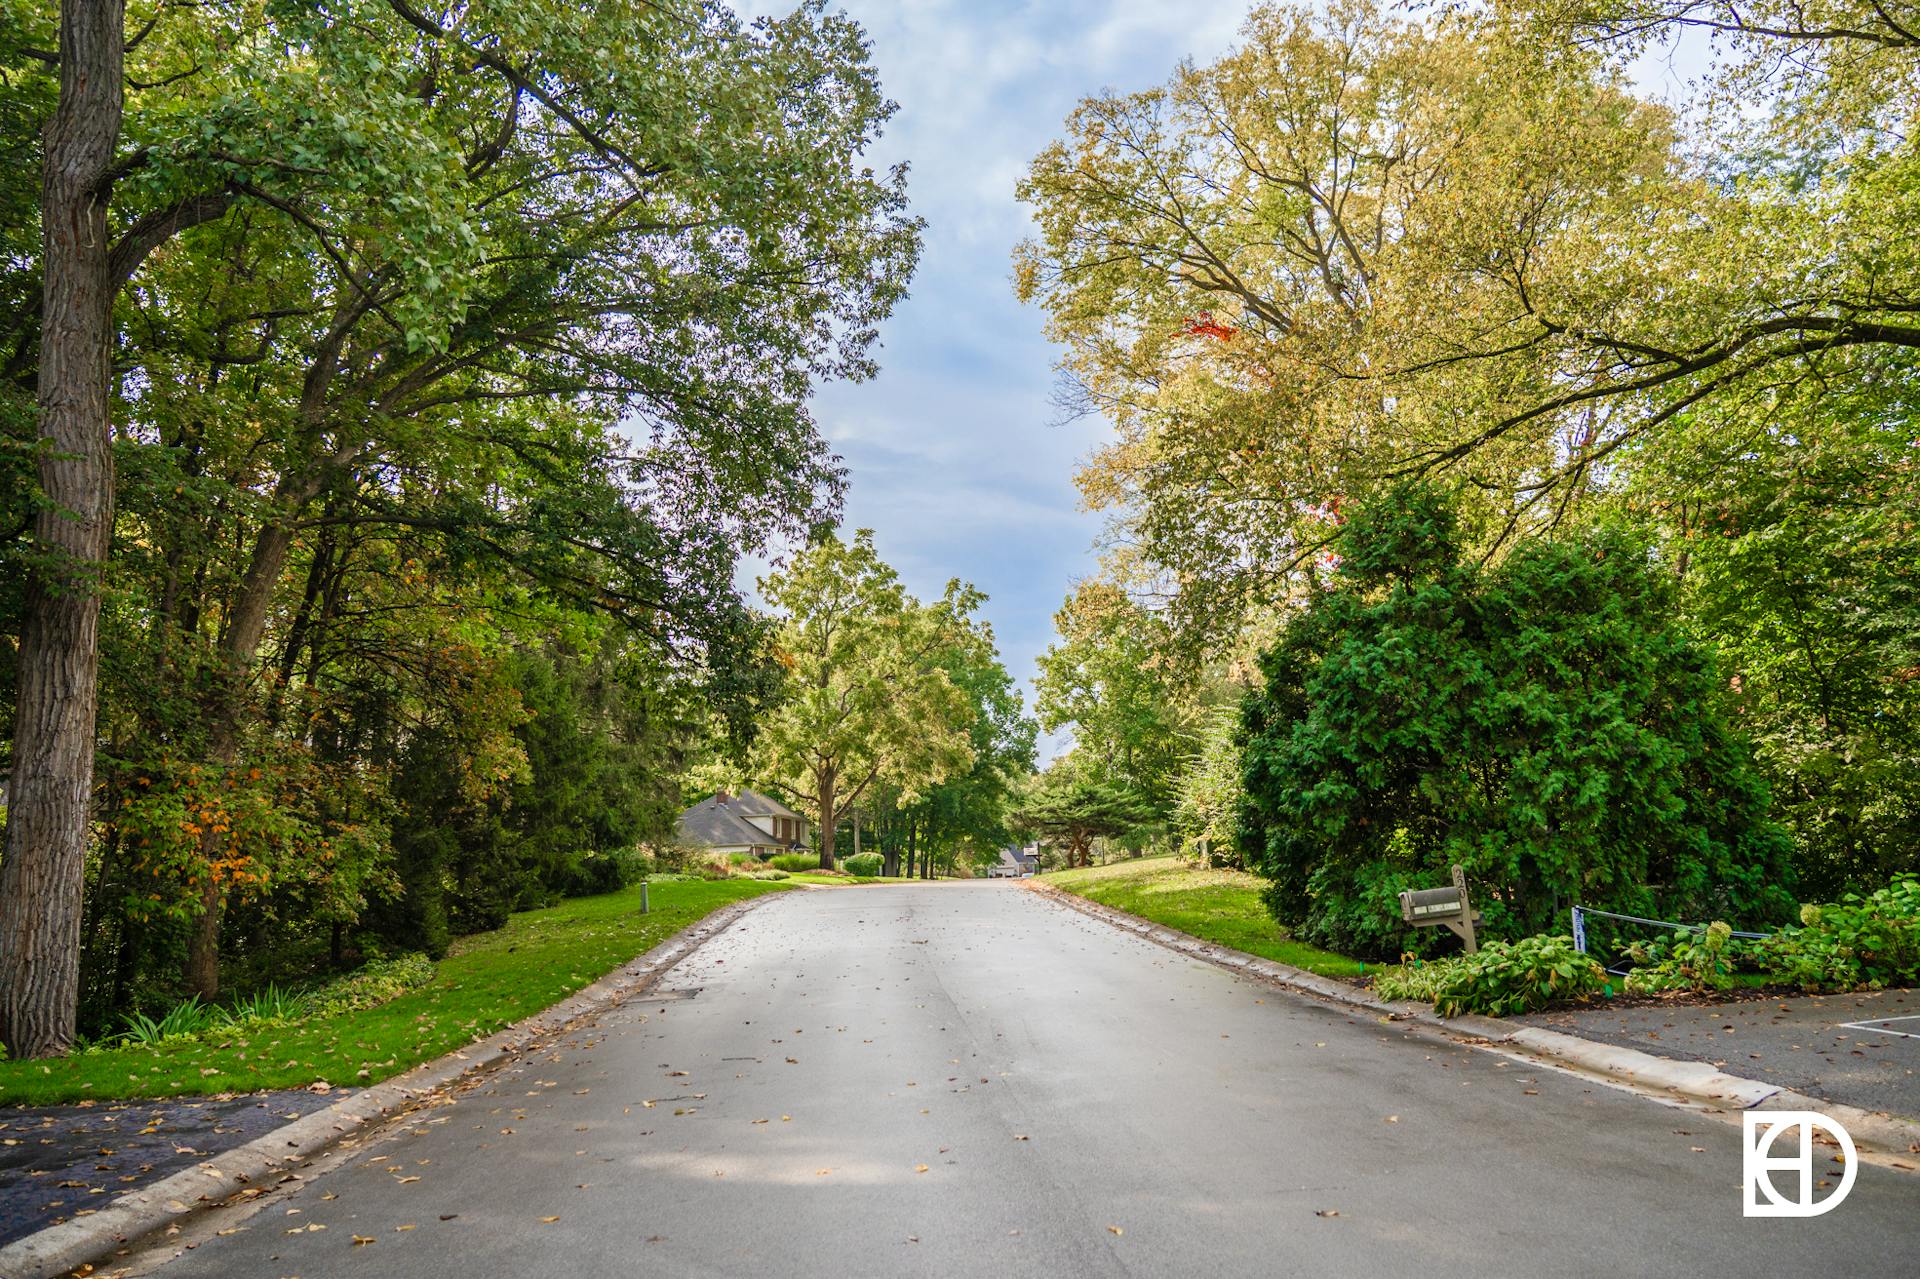 Photo of tree-lined street in Raintree Place neighborhood in Zionsville, Indiana.